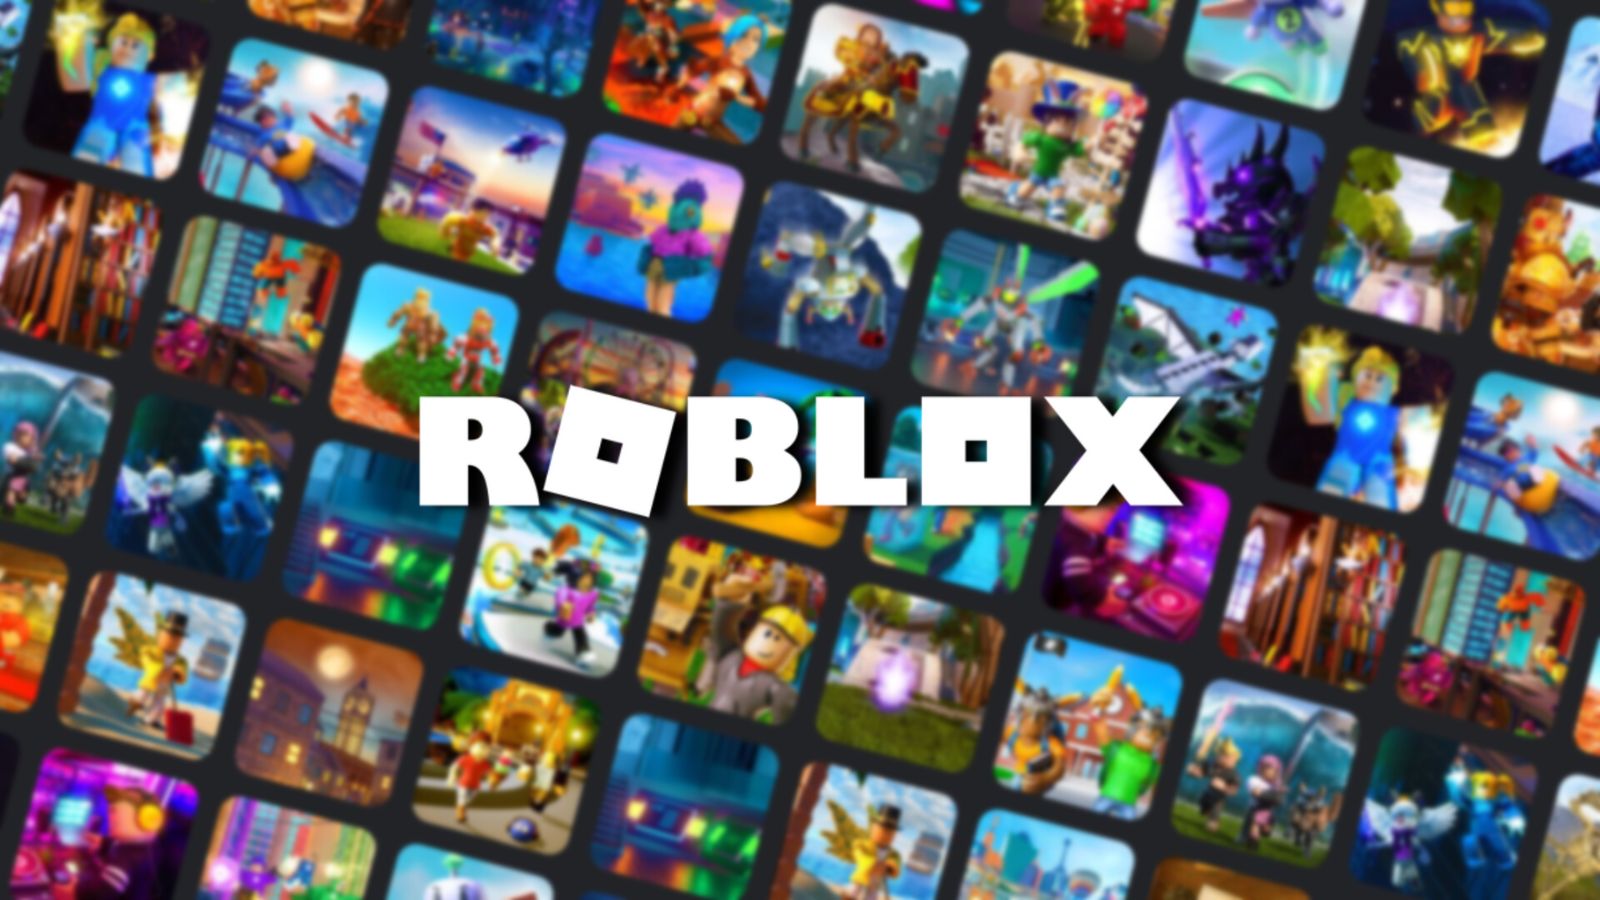 How to Make a Code Redeeming System in ROBLOX Studio